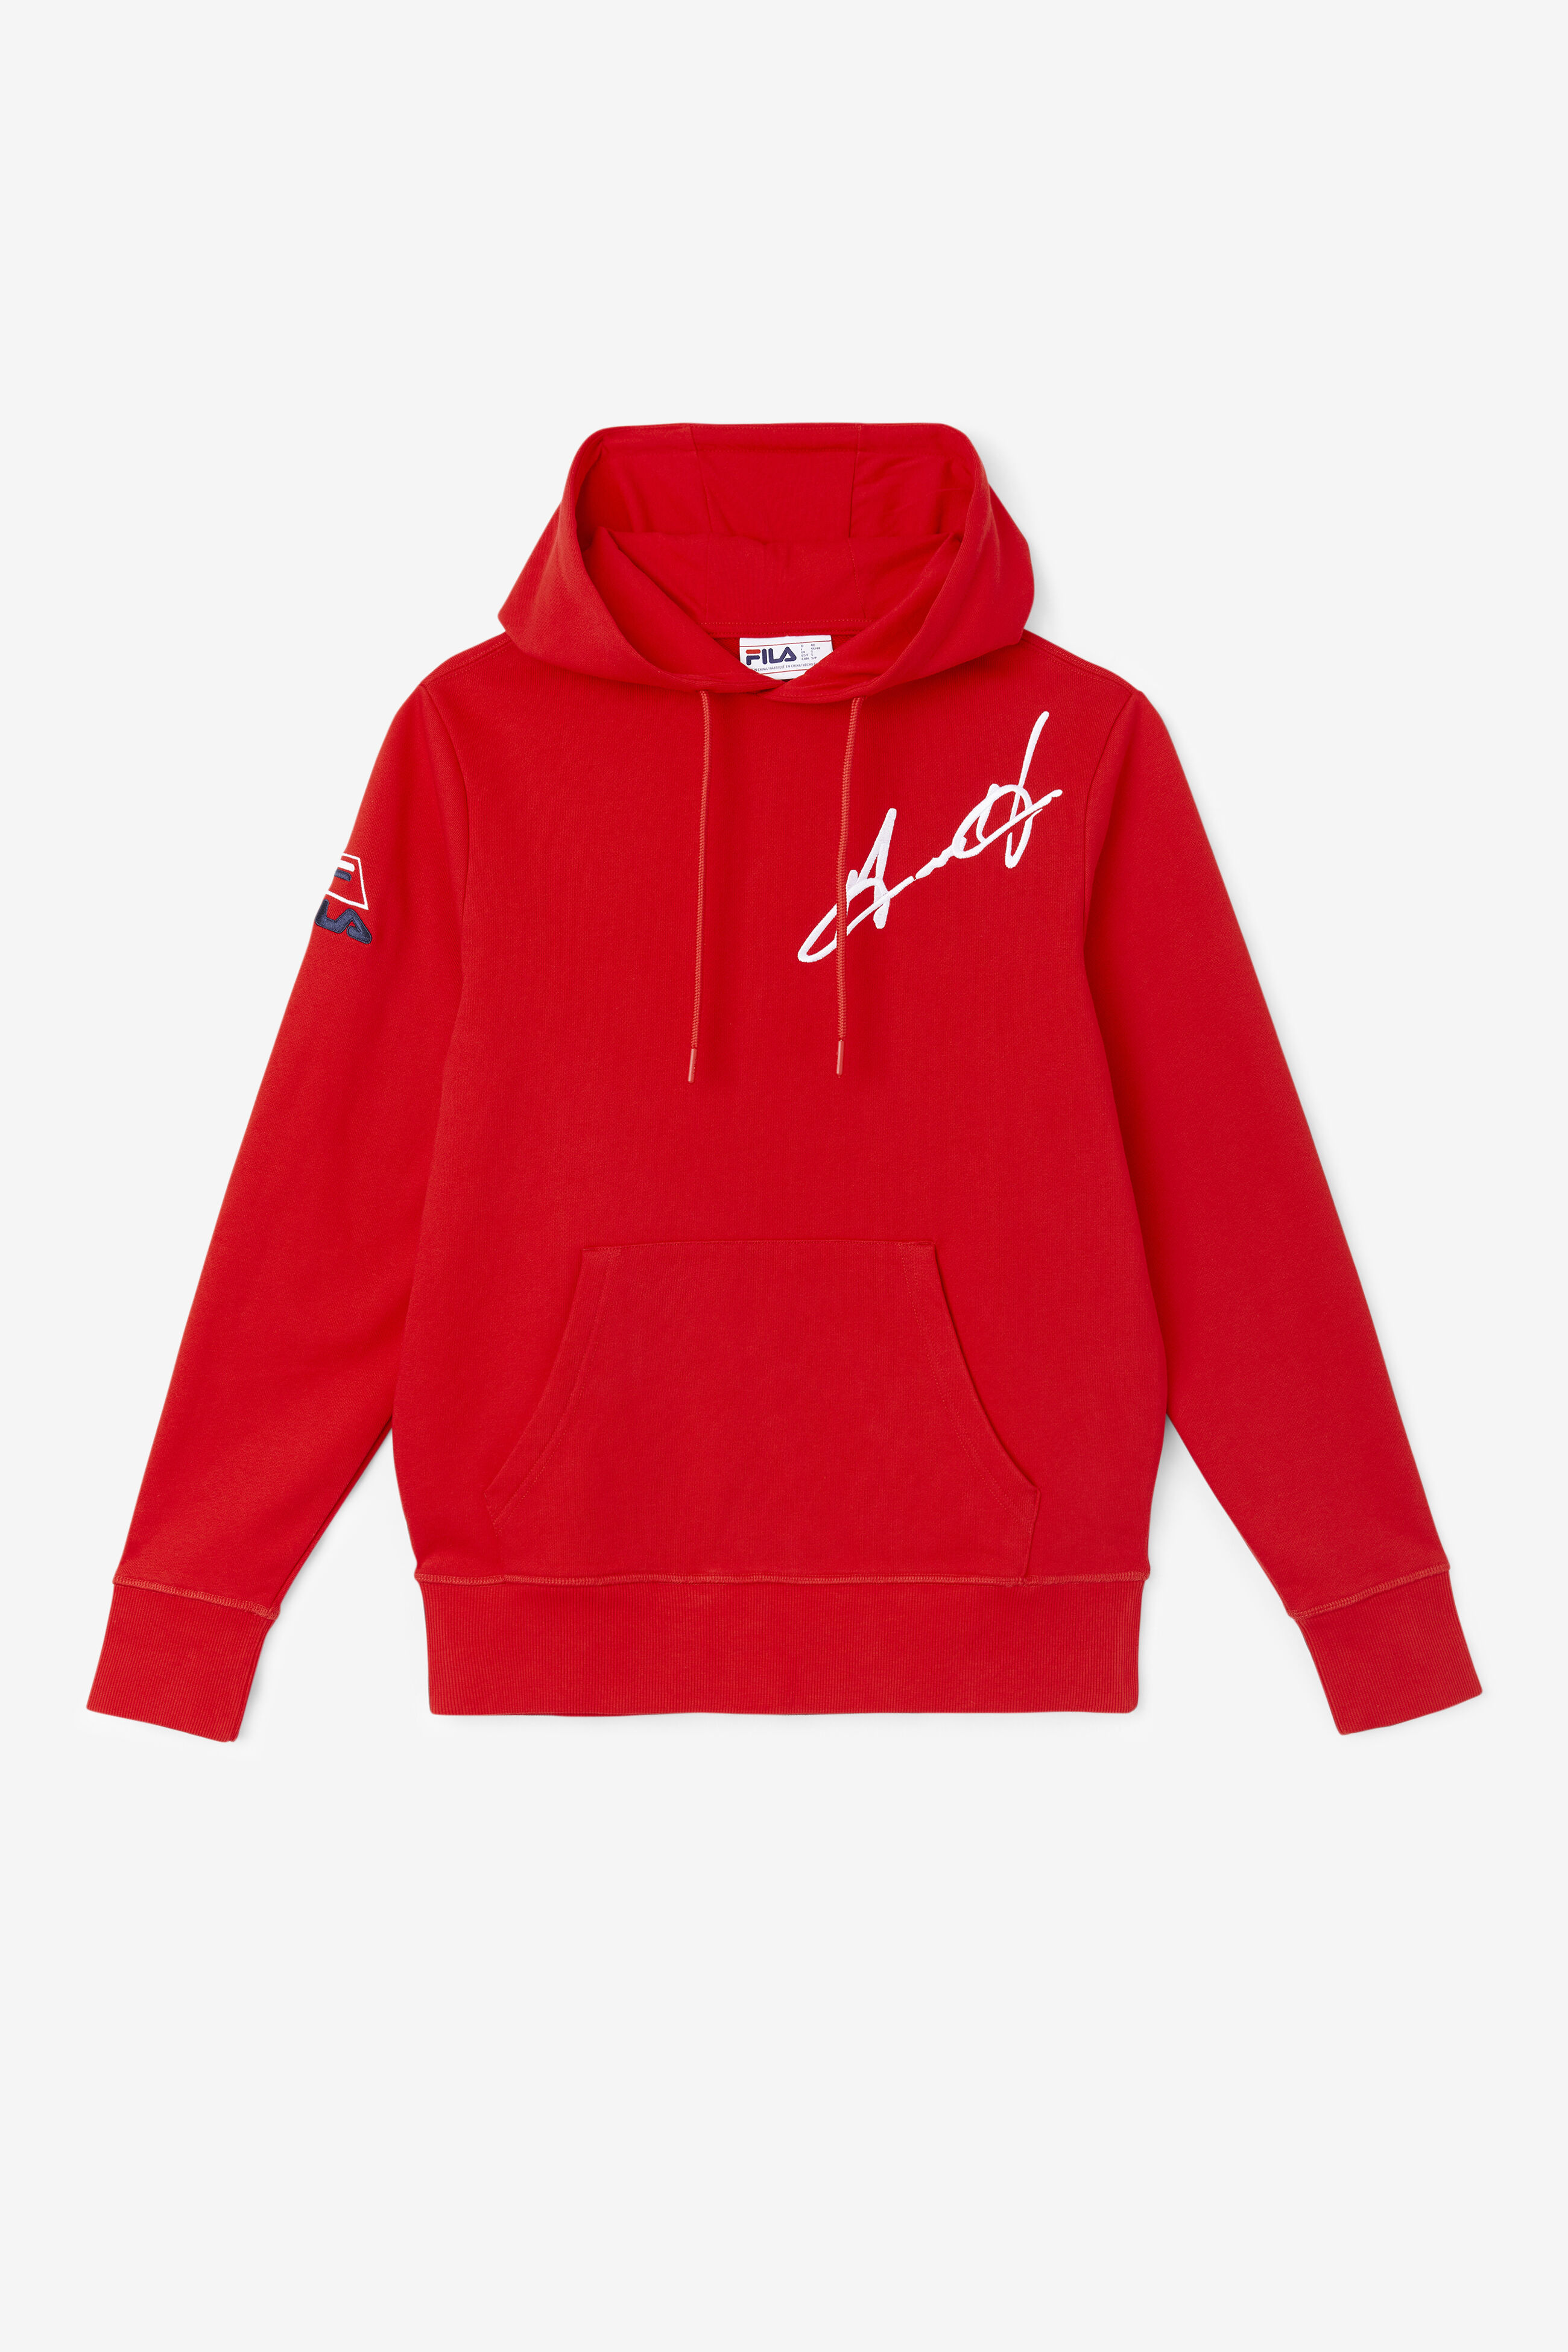 Grant Hill Lazarus French Terry Hoodie | Fila 731616861500